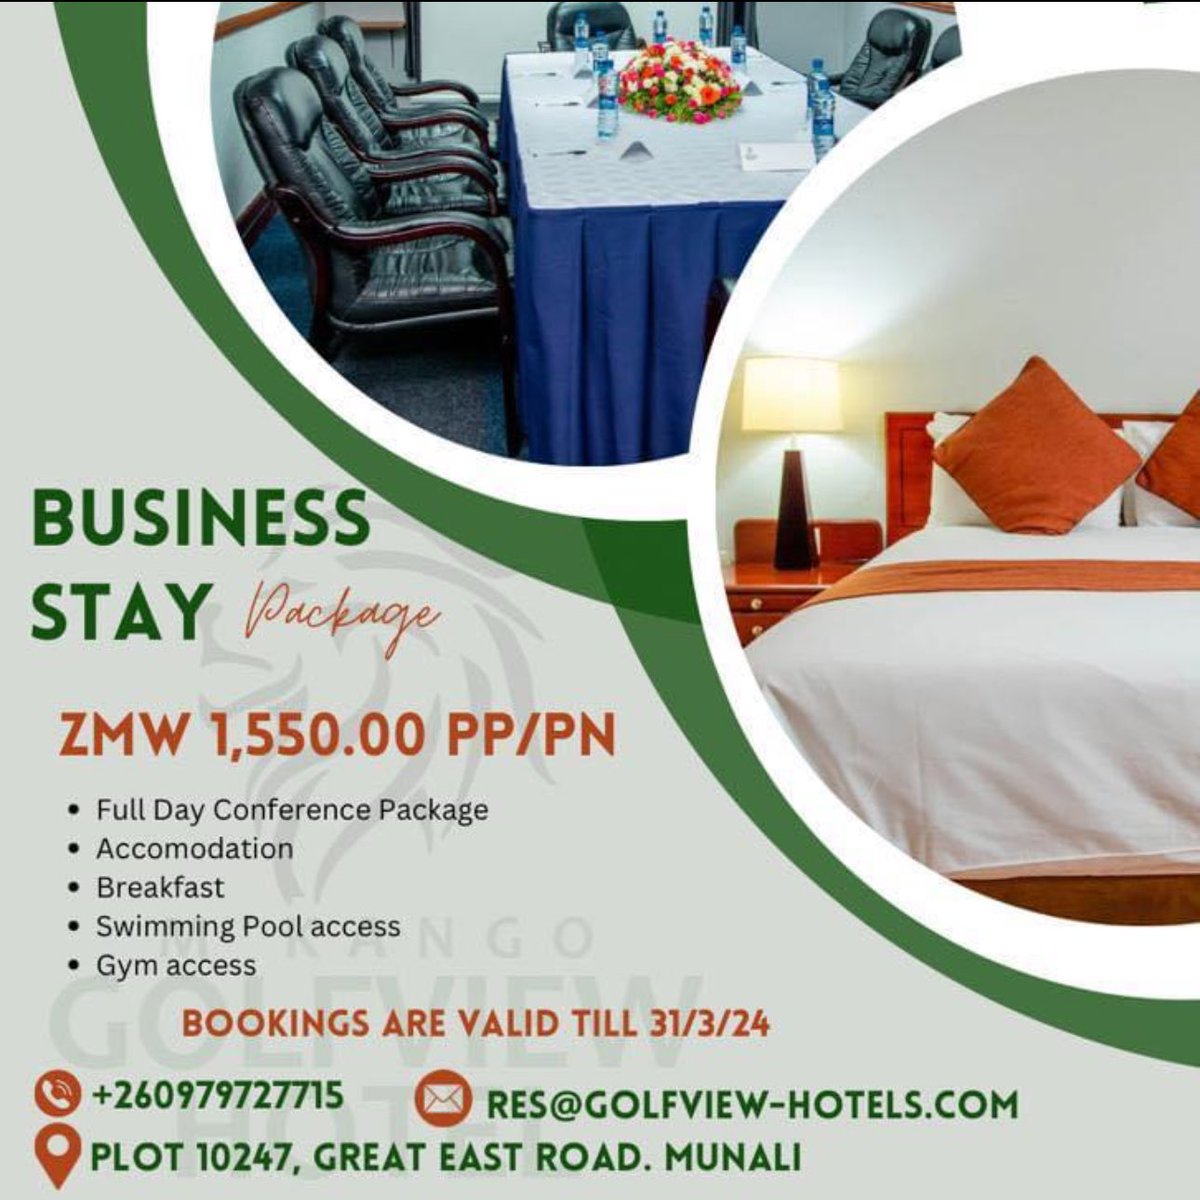 It’s the 2024 Kick off business year!! Plan your business quarter year with us. Email res@golfview-hotels.com or call +260979727715 more information. #servingyouwithpride #hotels #lusaka #2024BusinessPlan